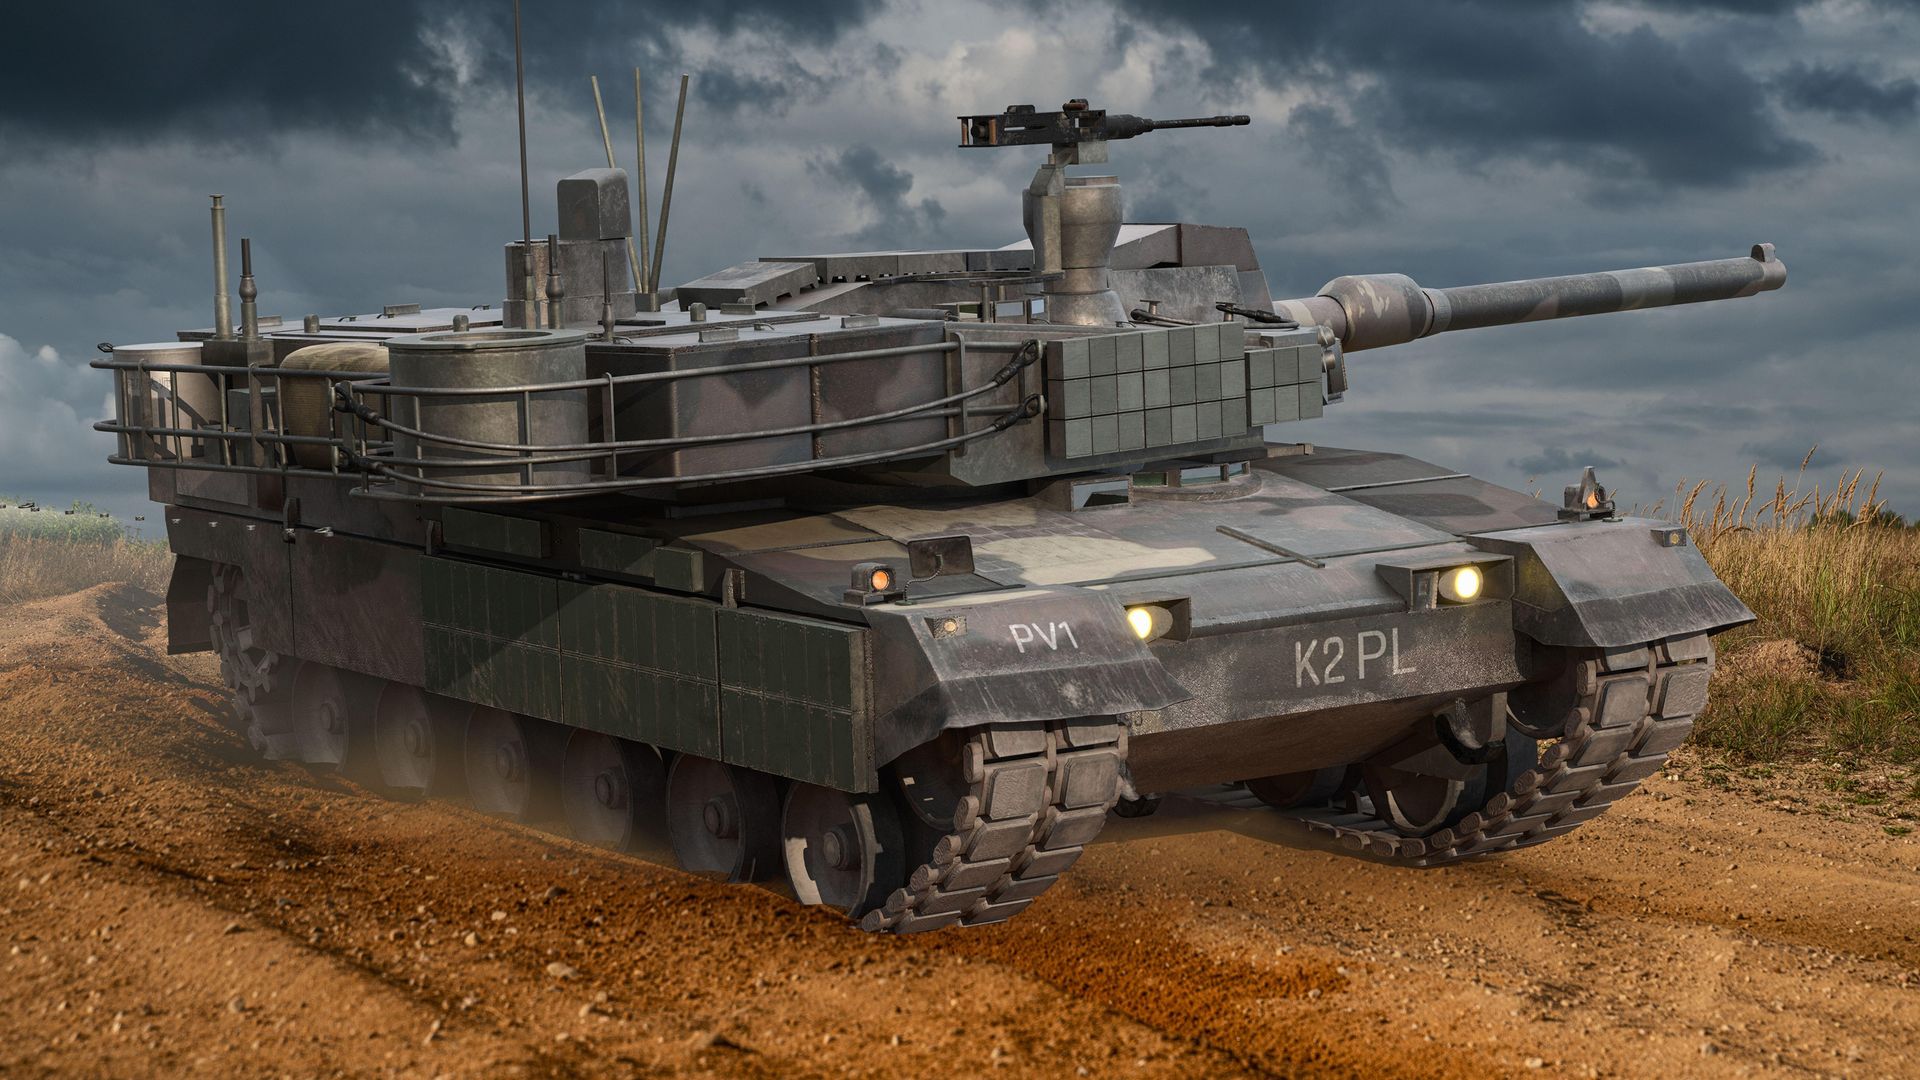 2jc4e9c k2 black panther   south korean basic tankhyundai rotem concern has offered the polish army a k2 model adapted to its needs along with full technolog